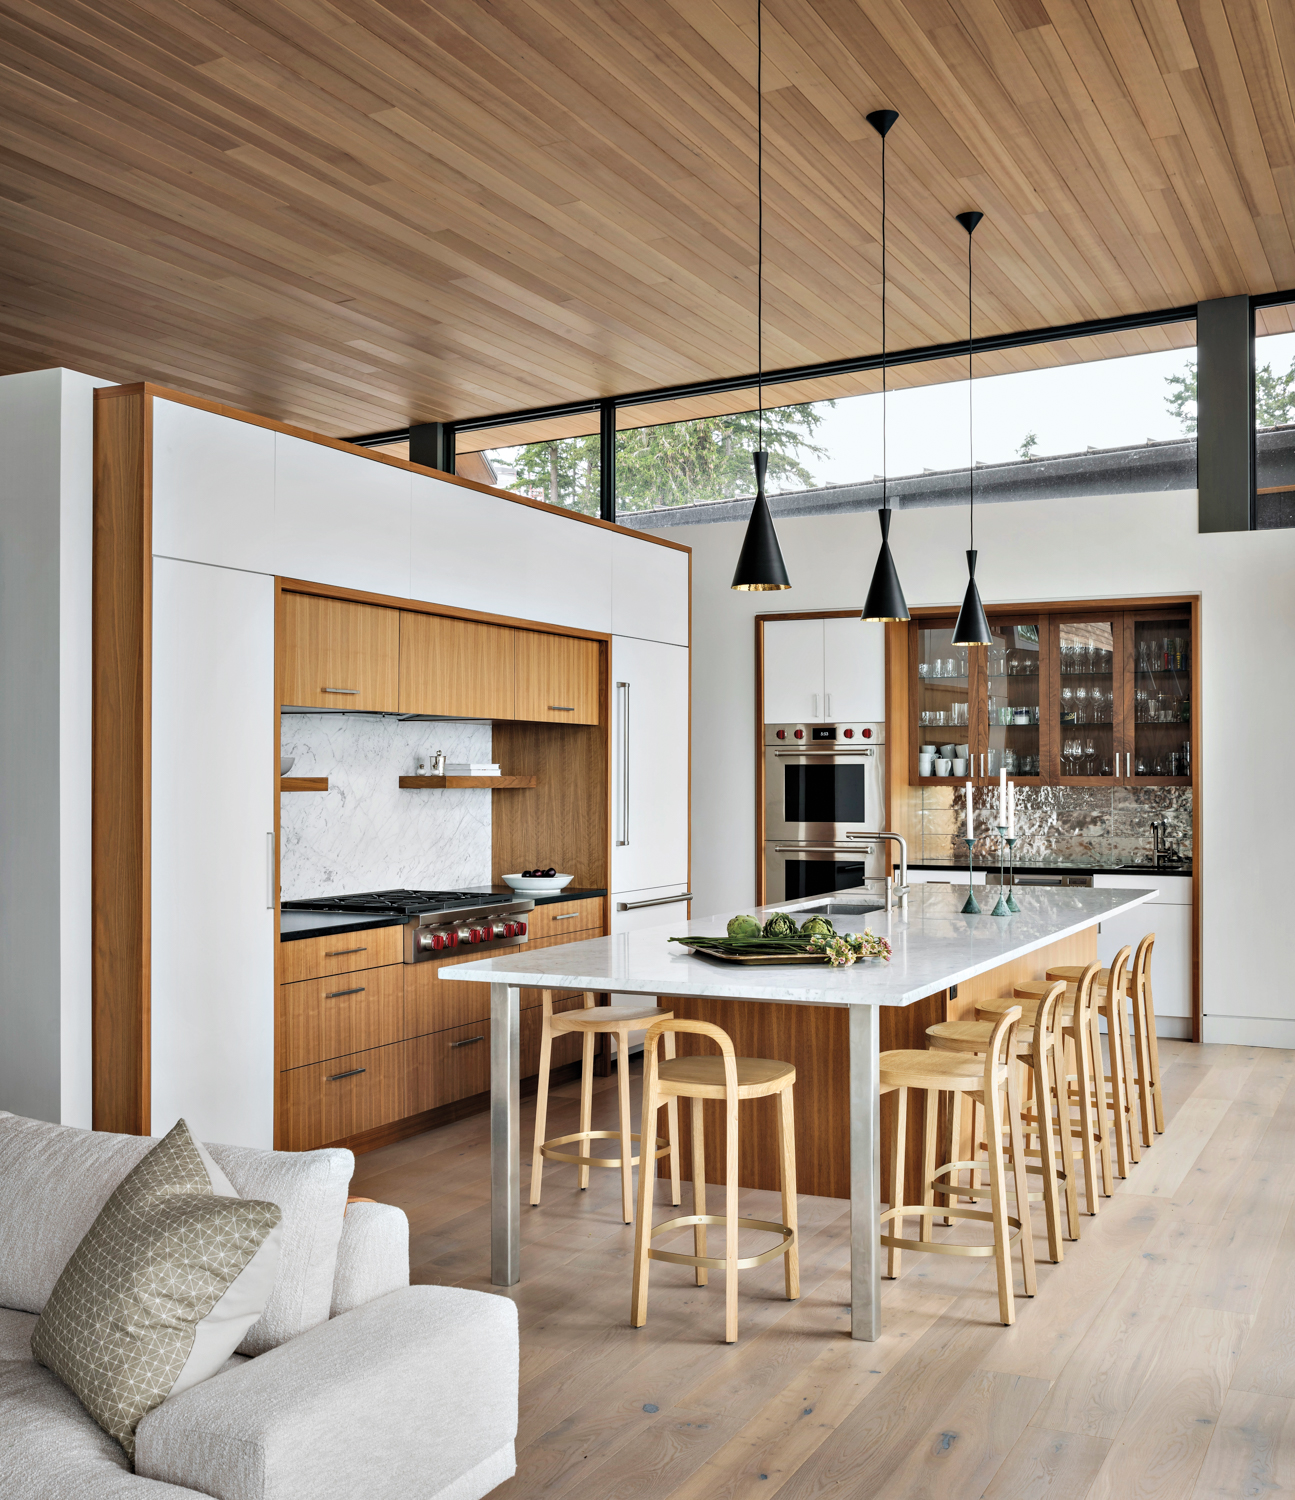 Light-colored wood and white marble make up the kitchen.